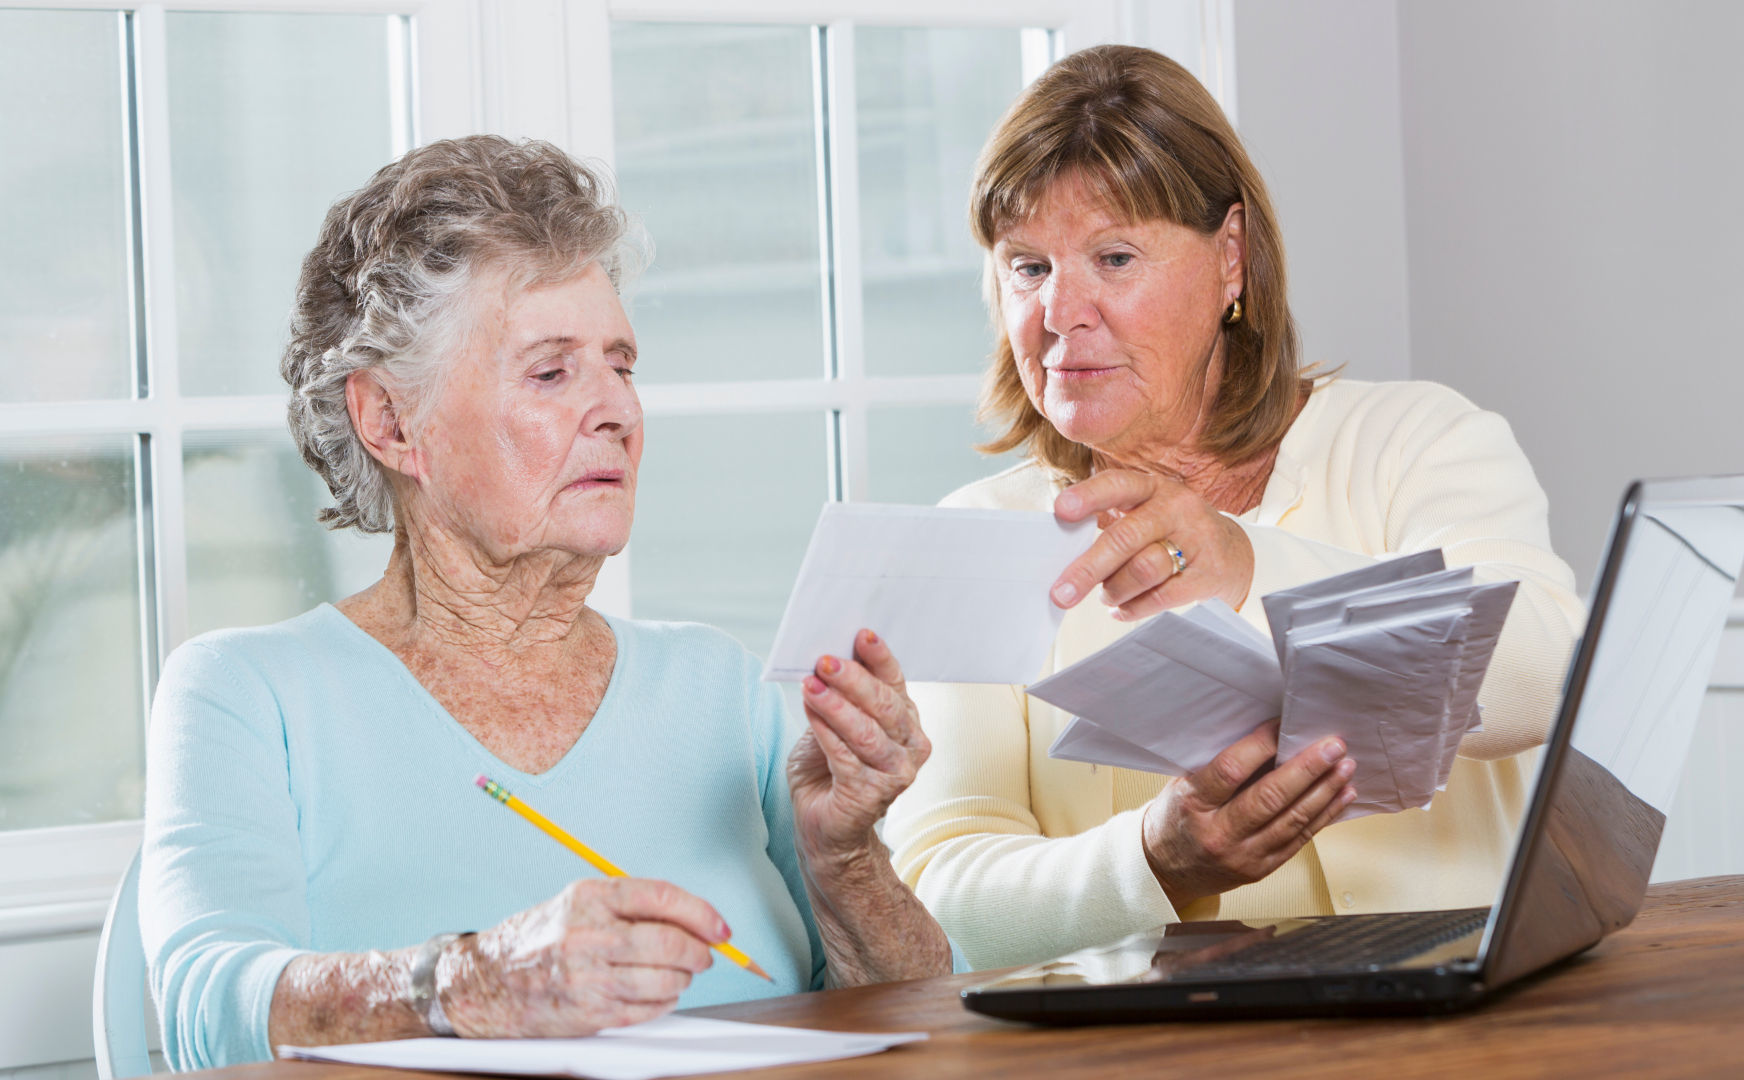 An elderly woman and her daughter looking at bills